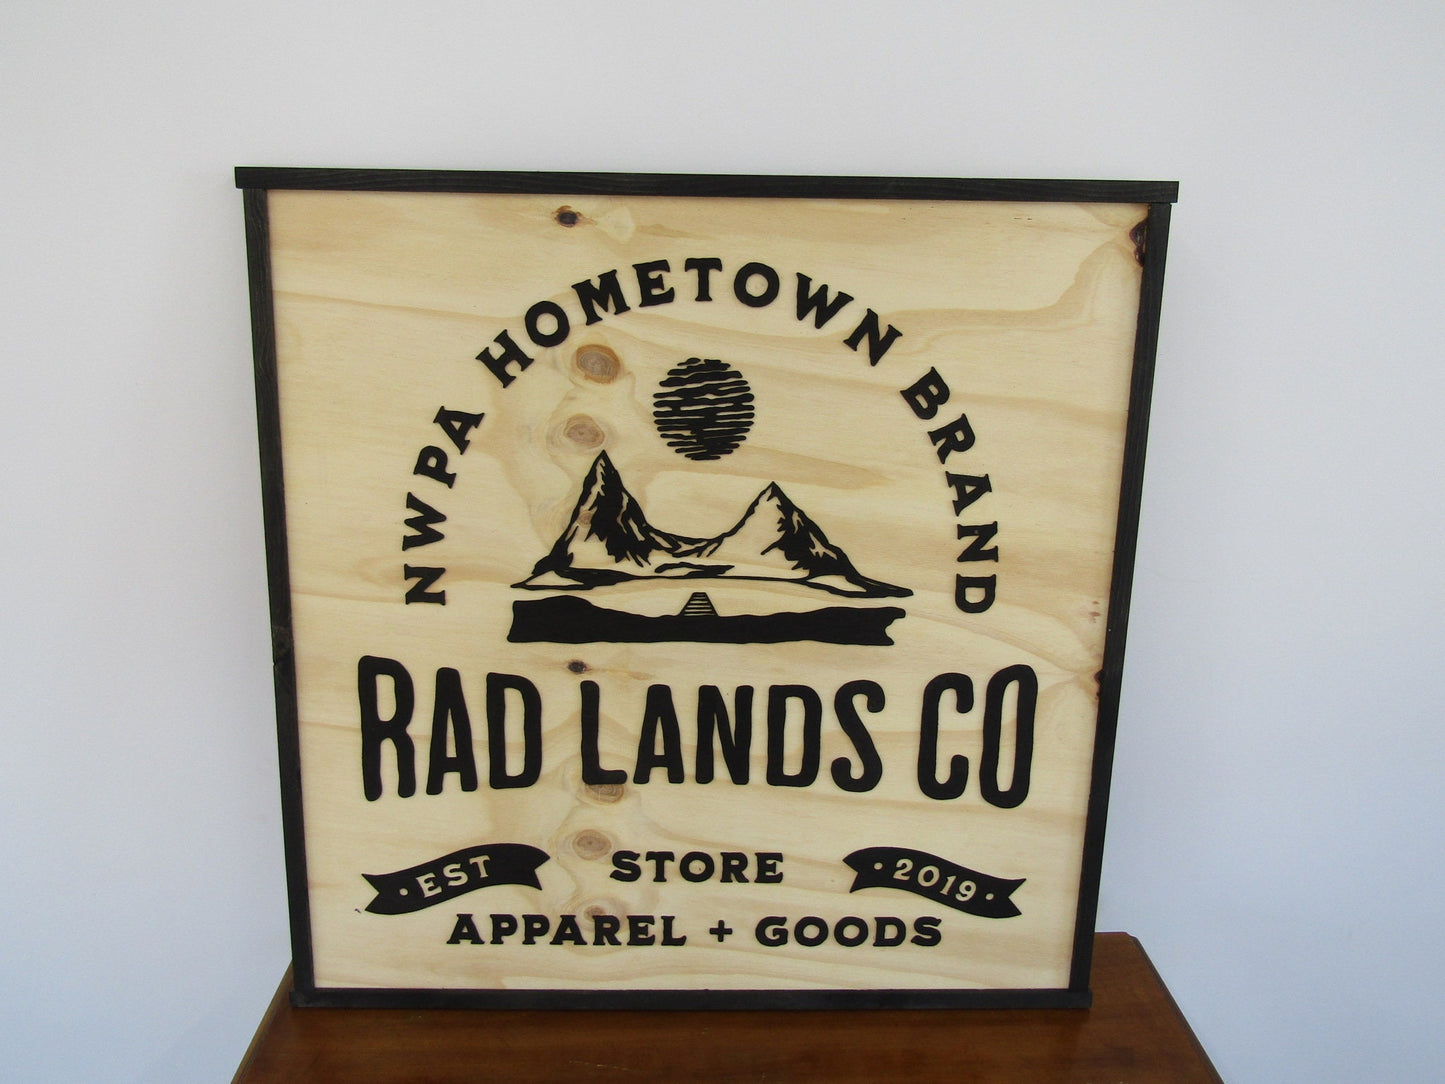 Large Custom Ranch Sign Square Over-sized Rustic Business Logo Apparel Store Co Wood Laser Cut Out 3D Extra Large Sign Footstepsinthepast